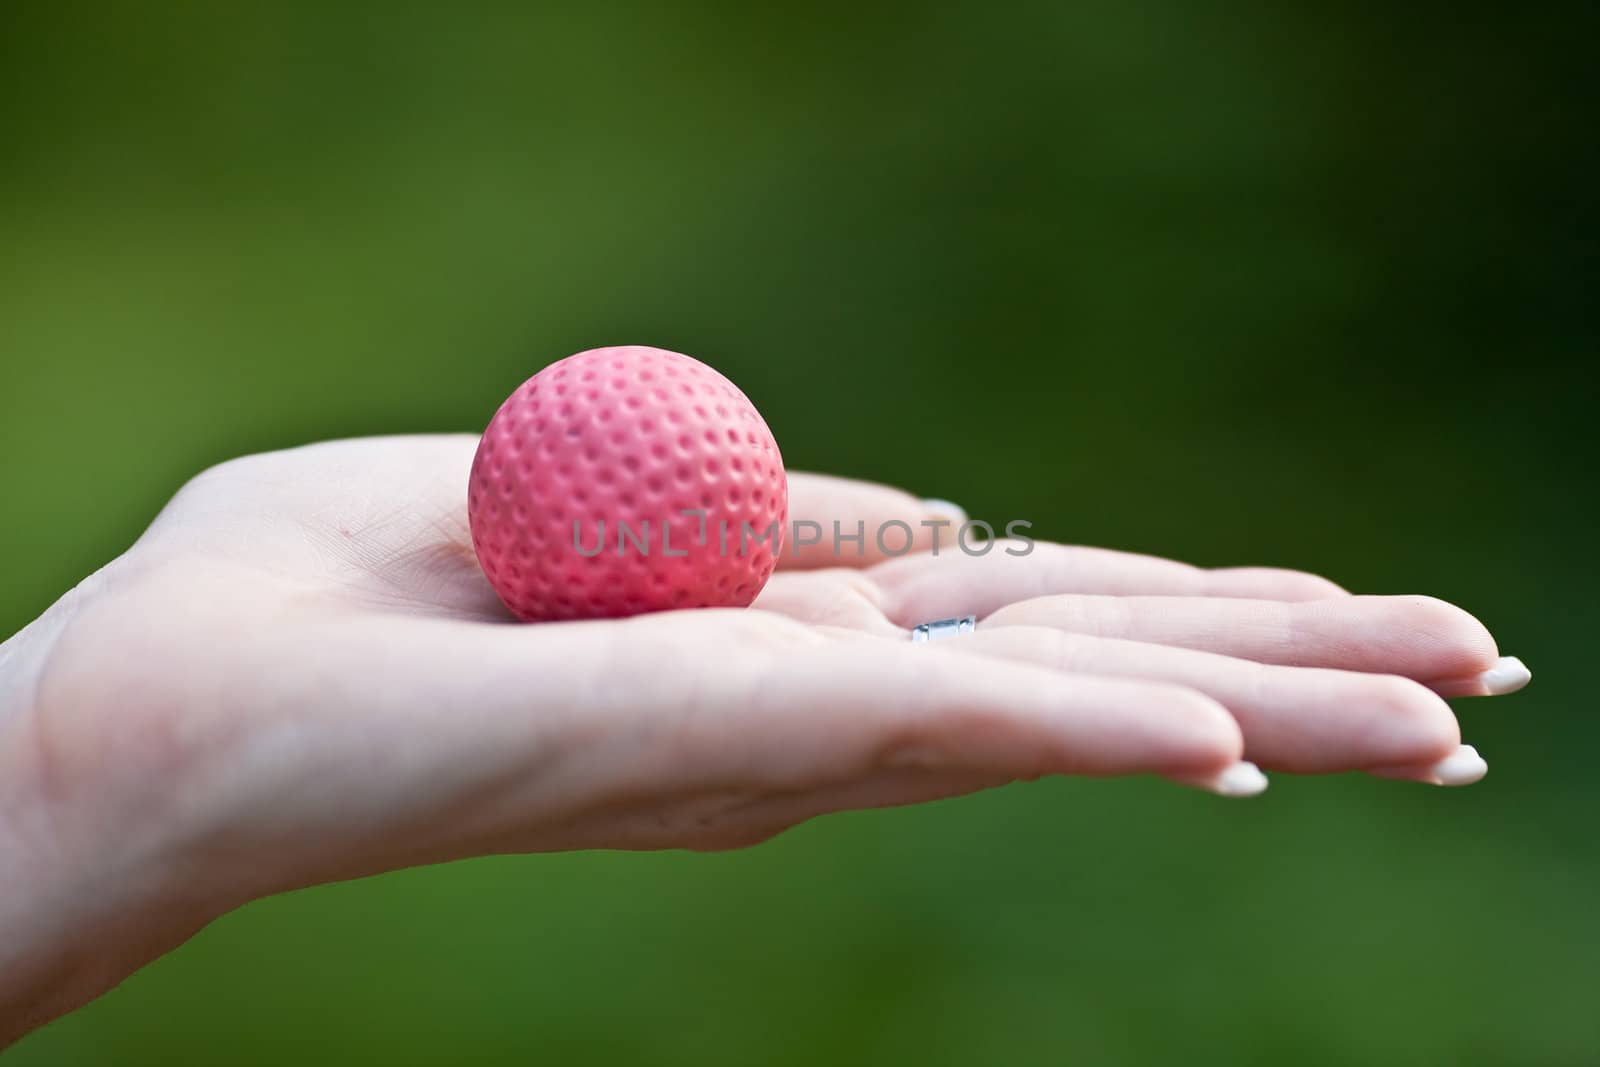 Woman with nice fingertips holding a golfball